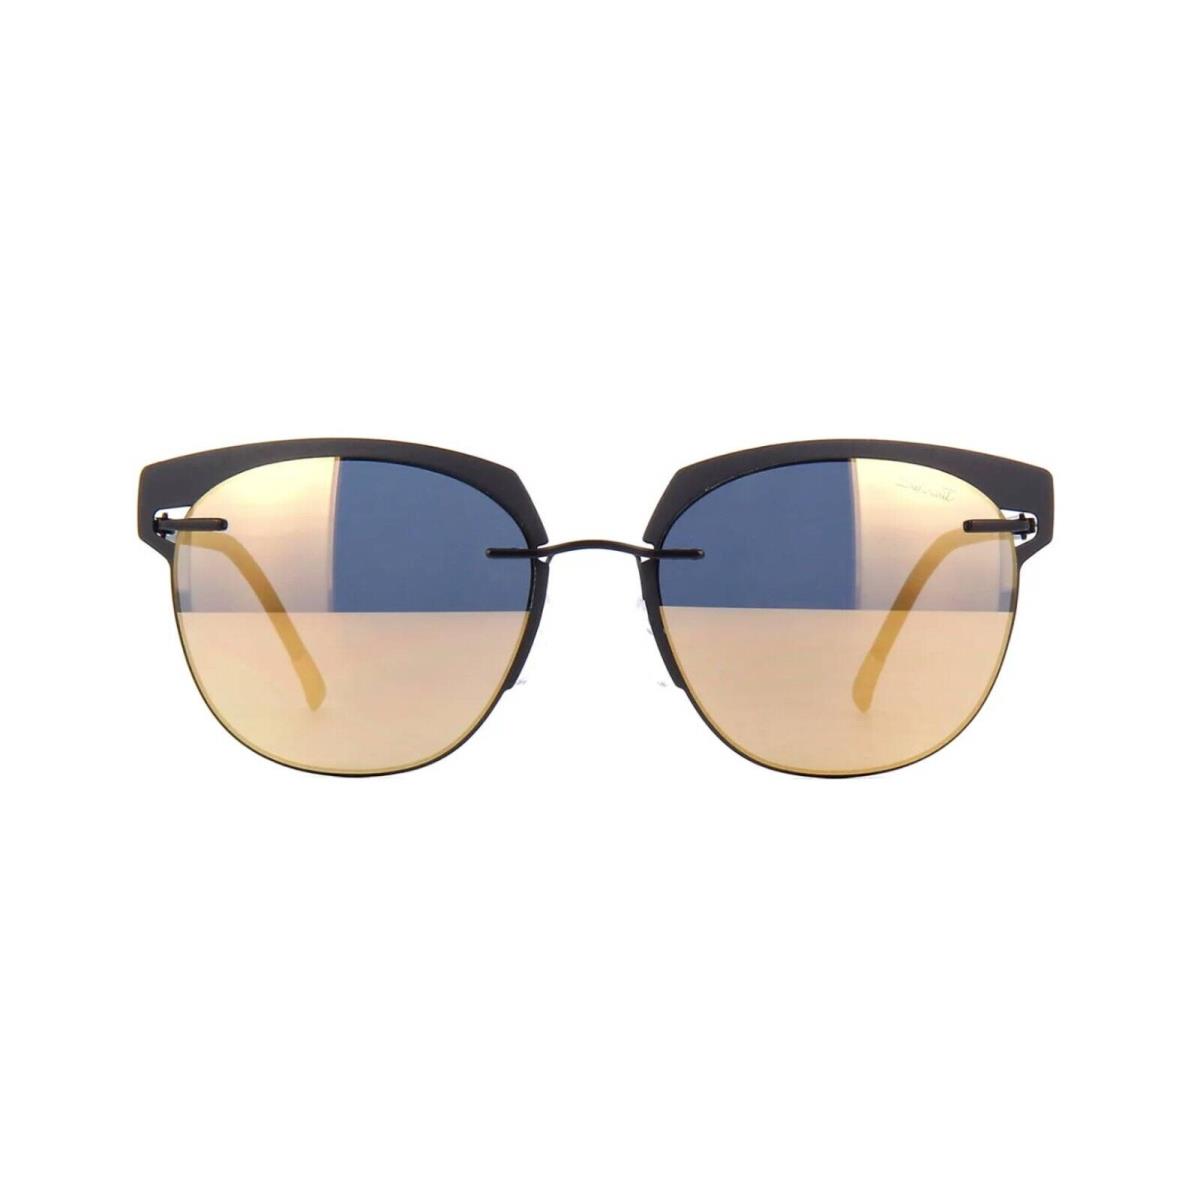 Silhouette Accent Shades 8702 Black/blue Glossy Gold Mirrored 9140 Sunglasses - Frame: Black, Lens: Blue Glossy Gold Mirrored